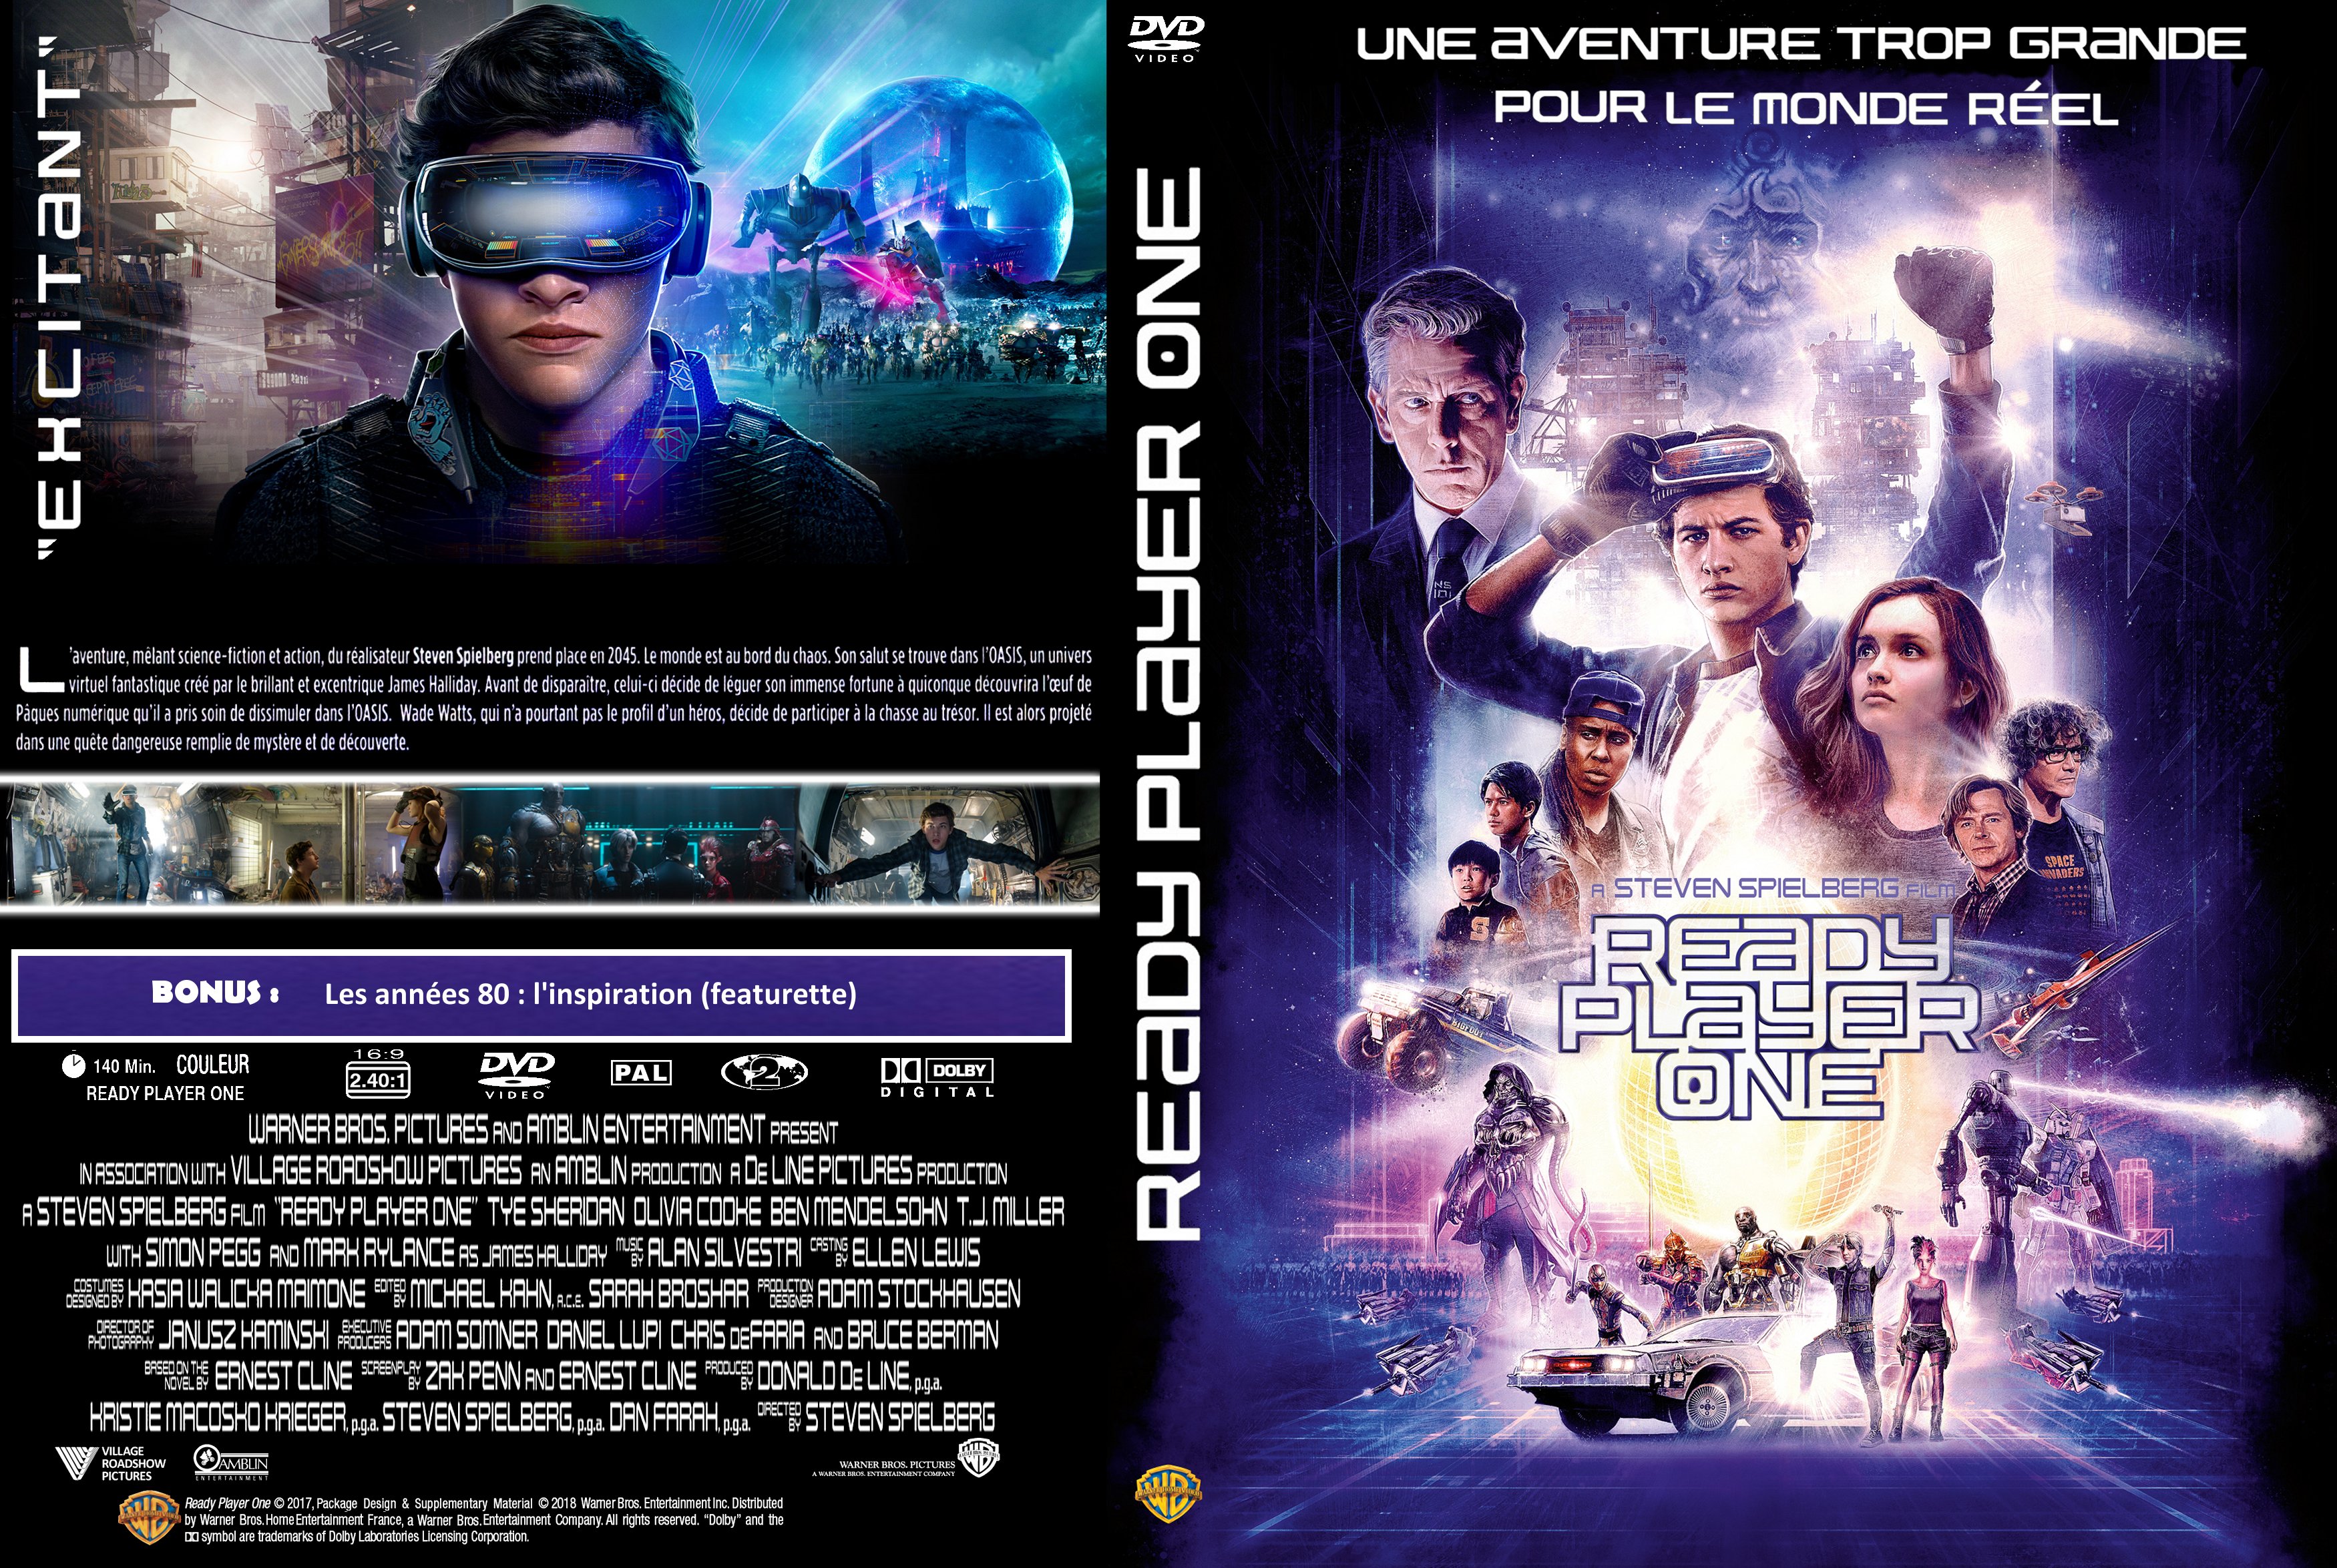 Jaquette DVD Ready Player One custom v2